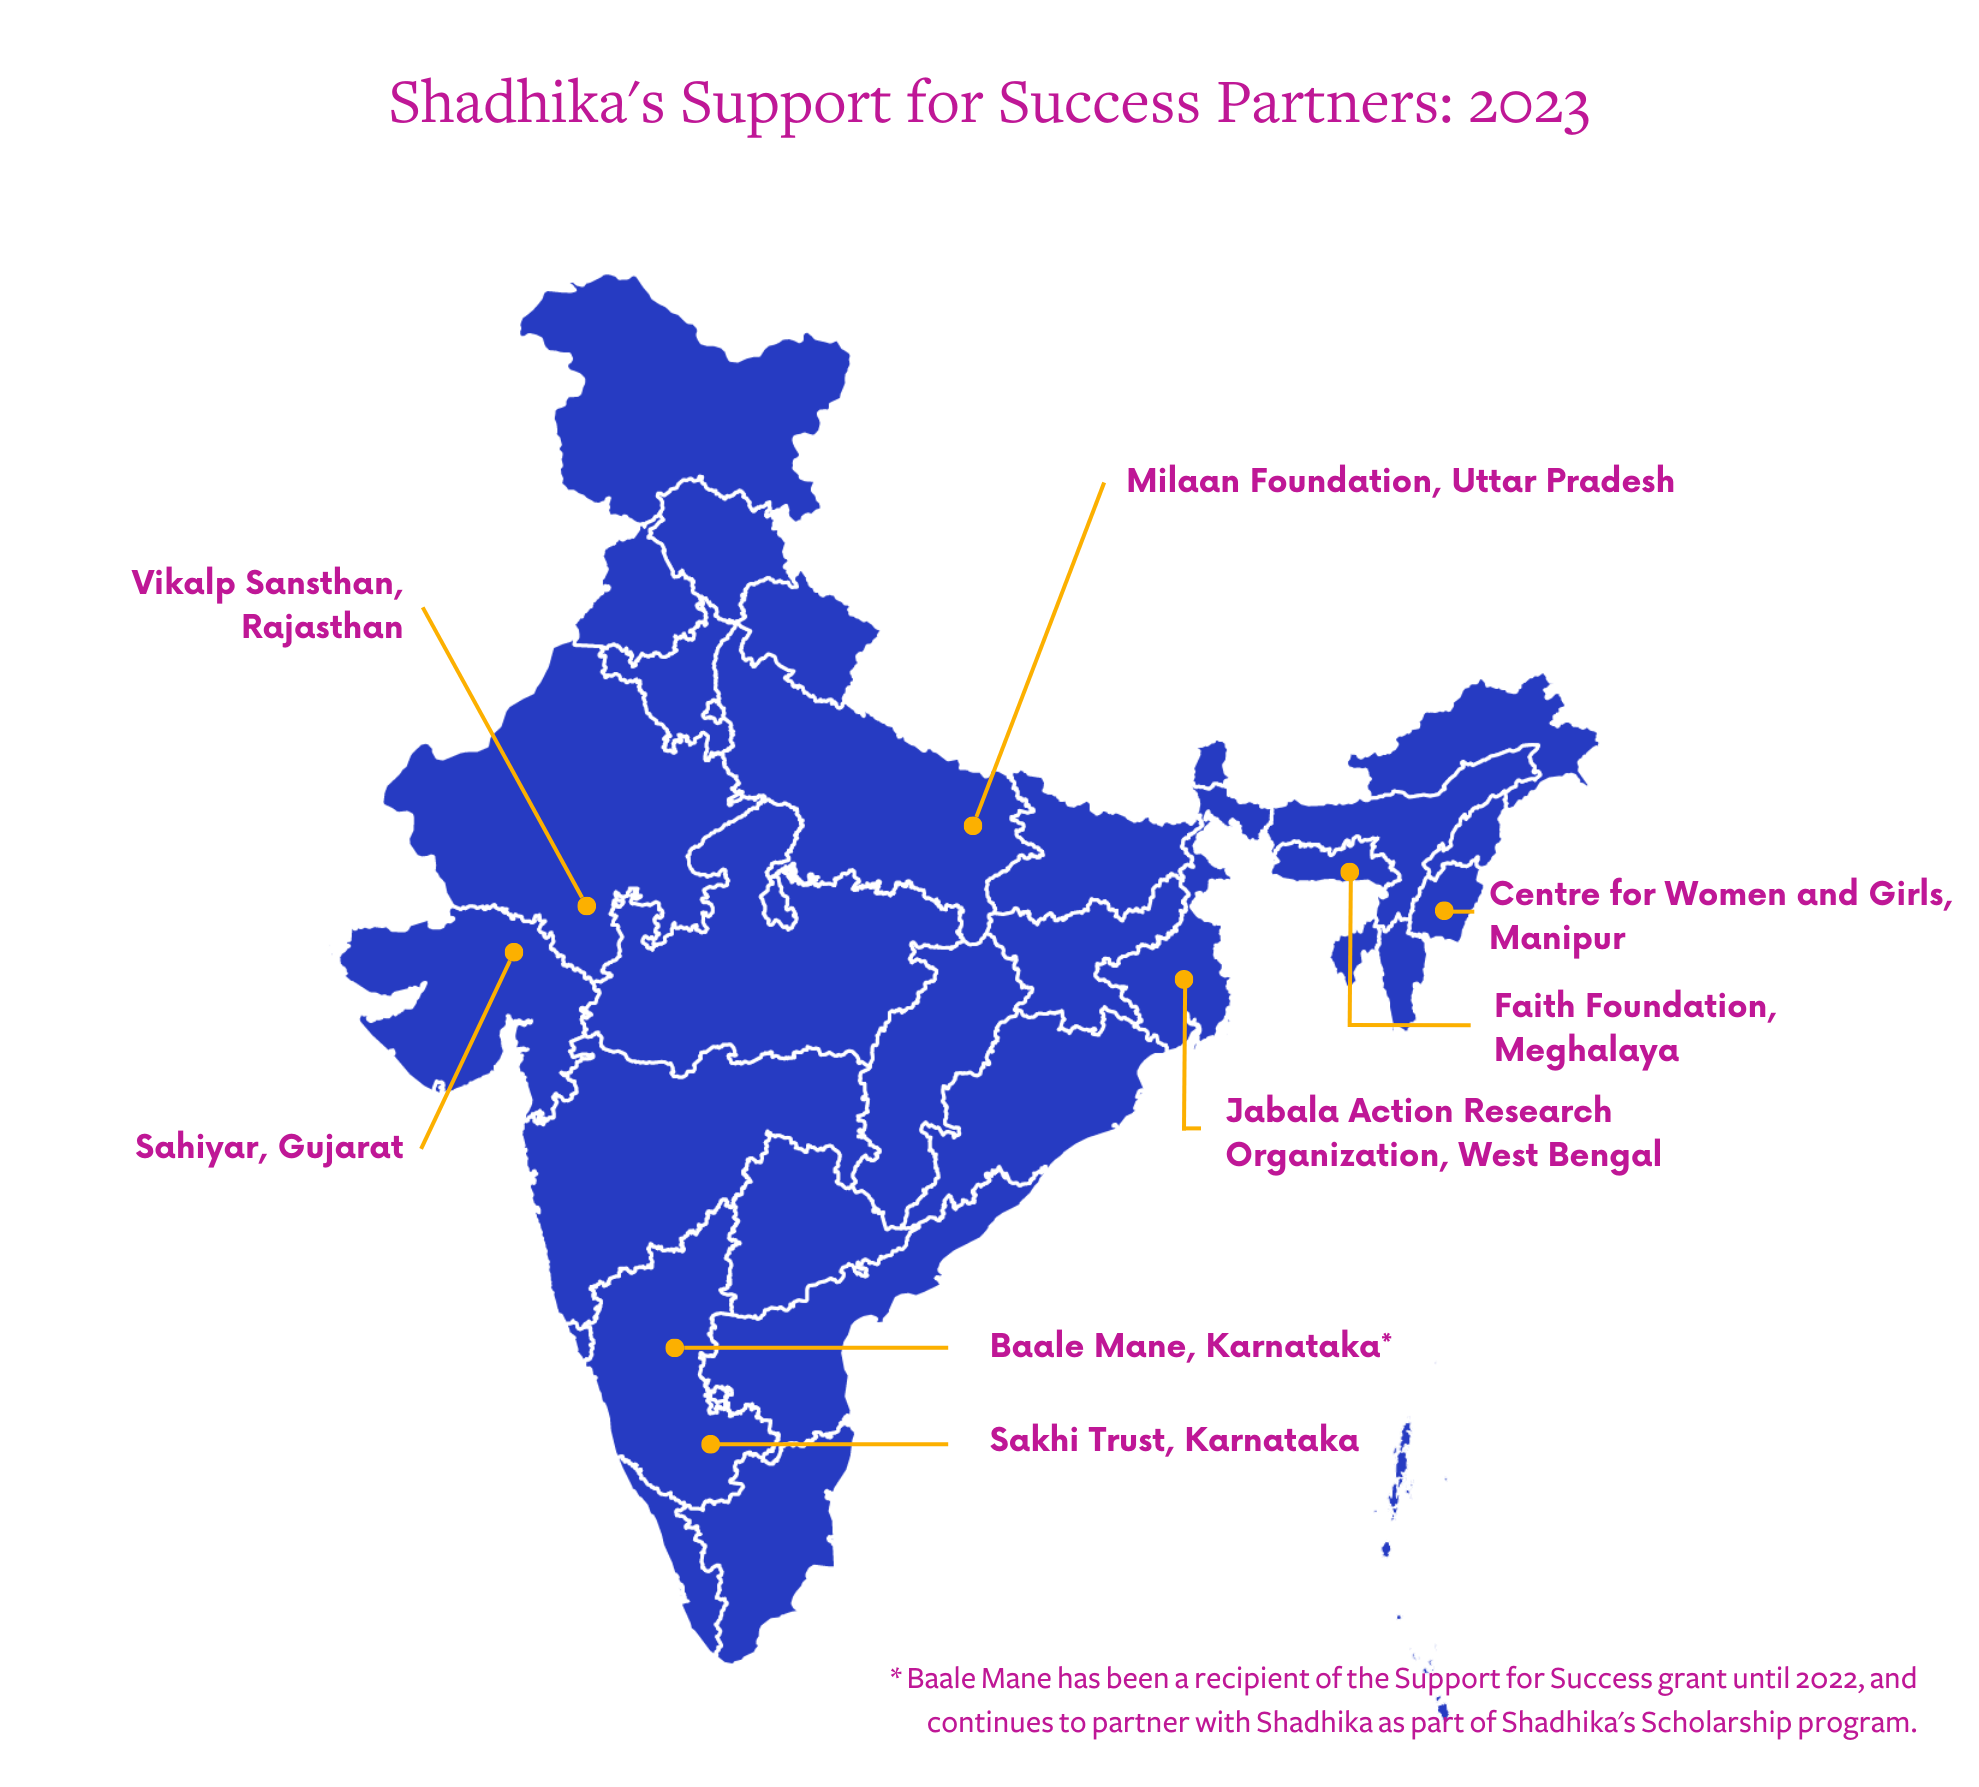 A blue political map of India listing all of Shadhika's partners within the states of India as yellow dots. The map is titled 'Shadhika's Support for Success Partners: 2023'. The names of the Partners are listed below, starting from the north of India, moving on to the North-East, East, South, South-West, and West. - Milaan Foundation, Uttar Pradesh - Centre for Women and Girls, Manipur - Faith Foundation, Meghalaya - Jabala Action Research Organization, West Bengal - Baale Mane, Karnataka (There is an asterisk next to Baale Mane's listing with the explanation that Baale Mane has been a recipient of the Support for Success grant until 2022, and continues to partner with Shadhika as part of Shadhika's Scholarship program) - Sakhi Trust, Karnataka - Sahiyar, Gujarat - Vikalp Sansthan, Rajasthan